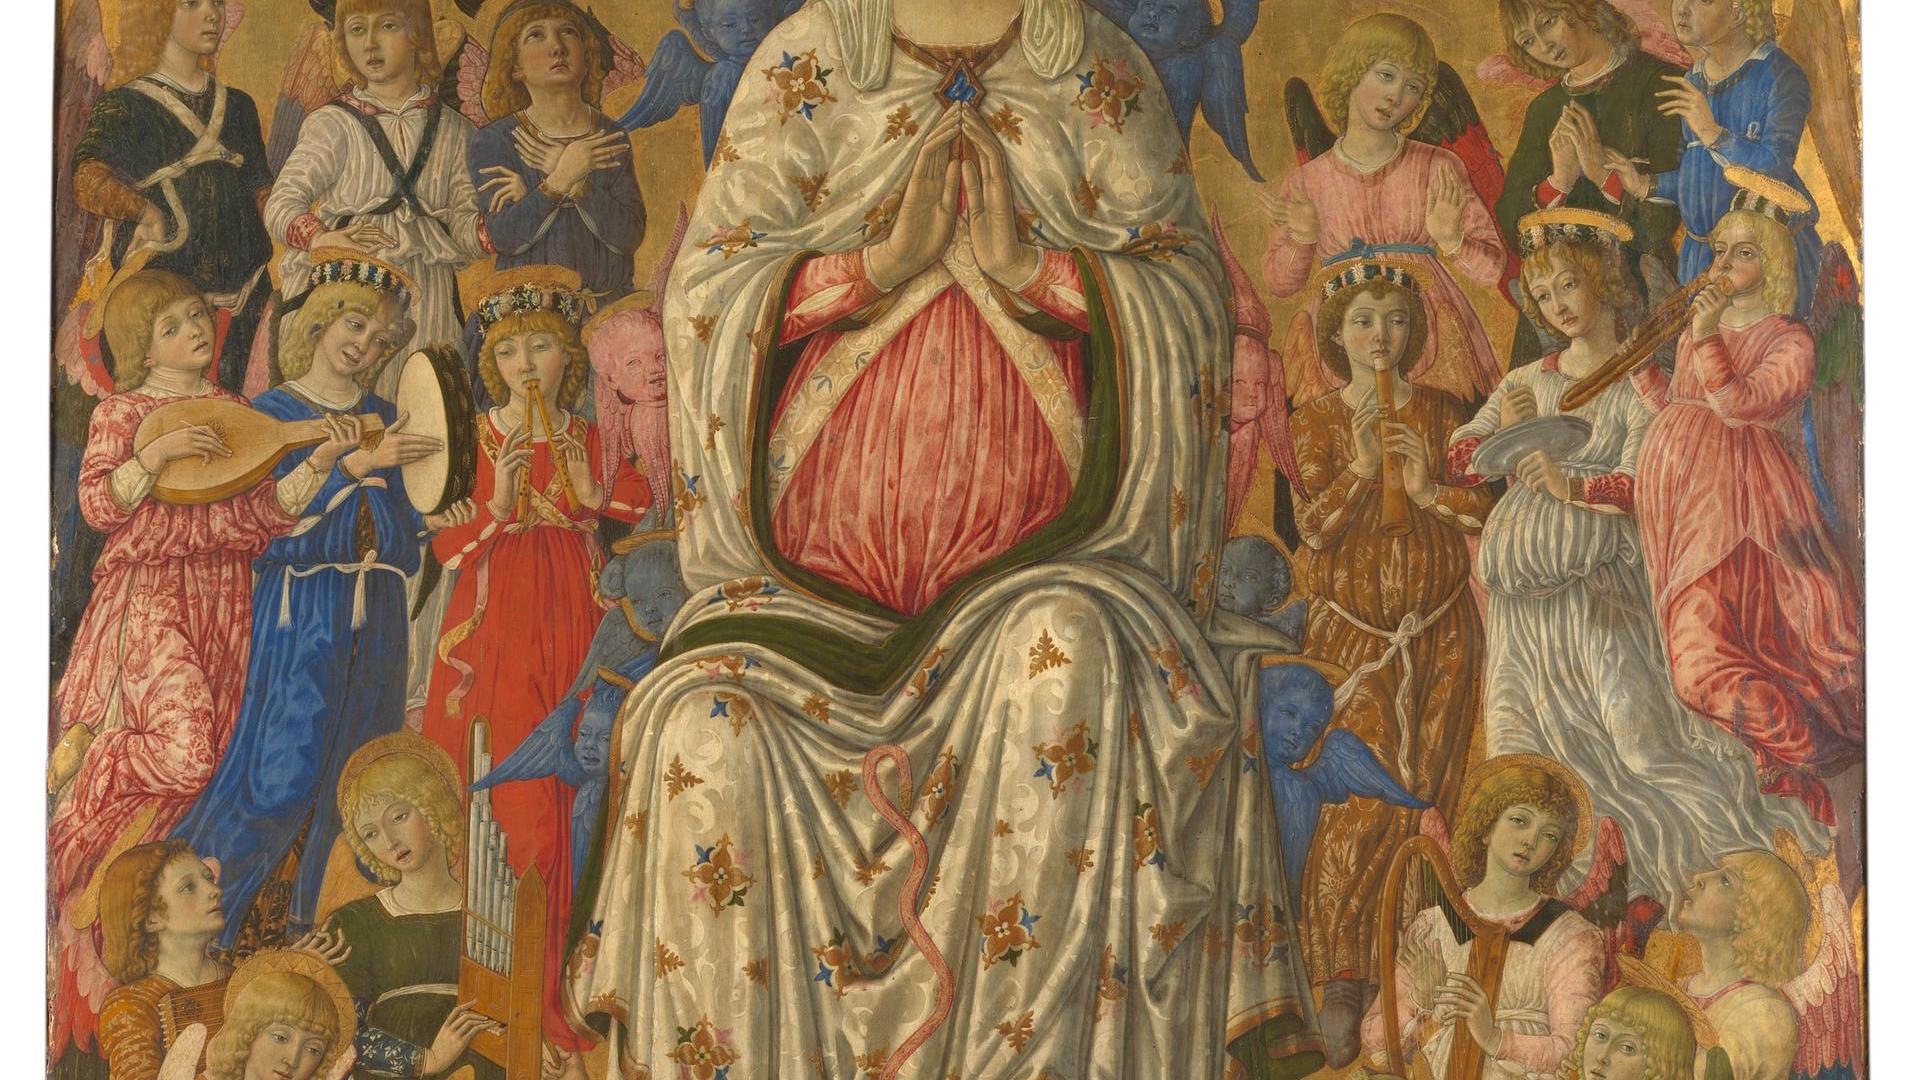 The Assumption of the Virgin by Matteo di Giovanni